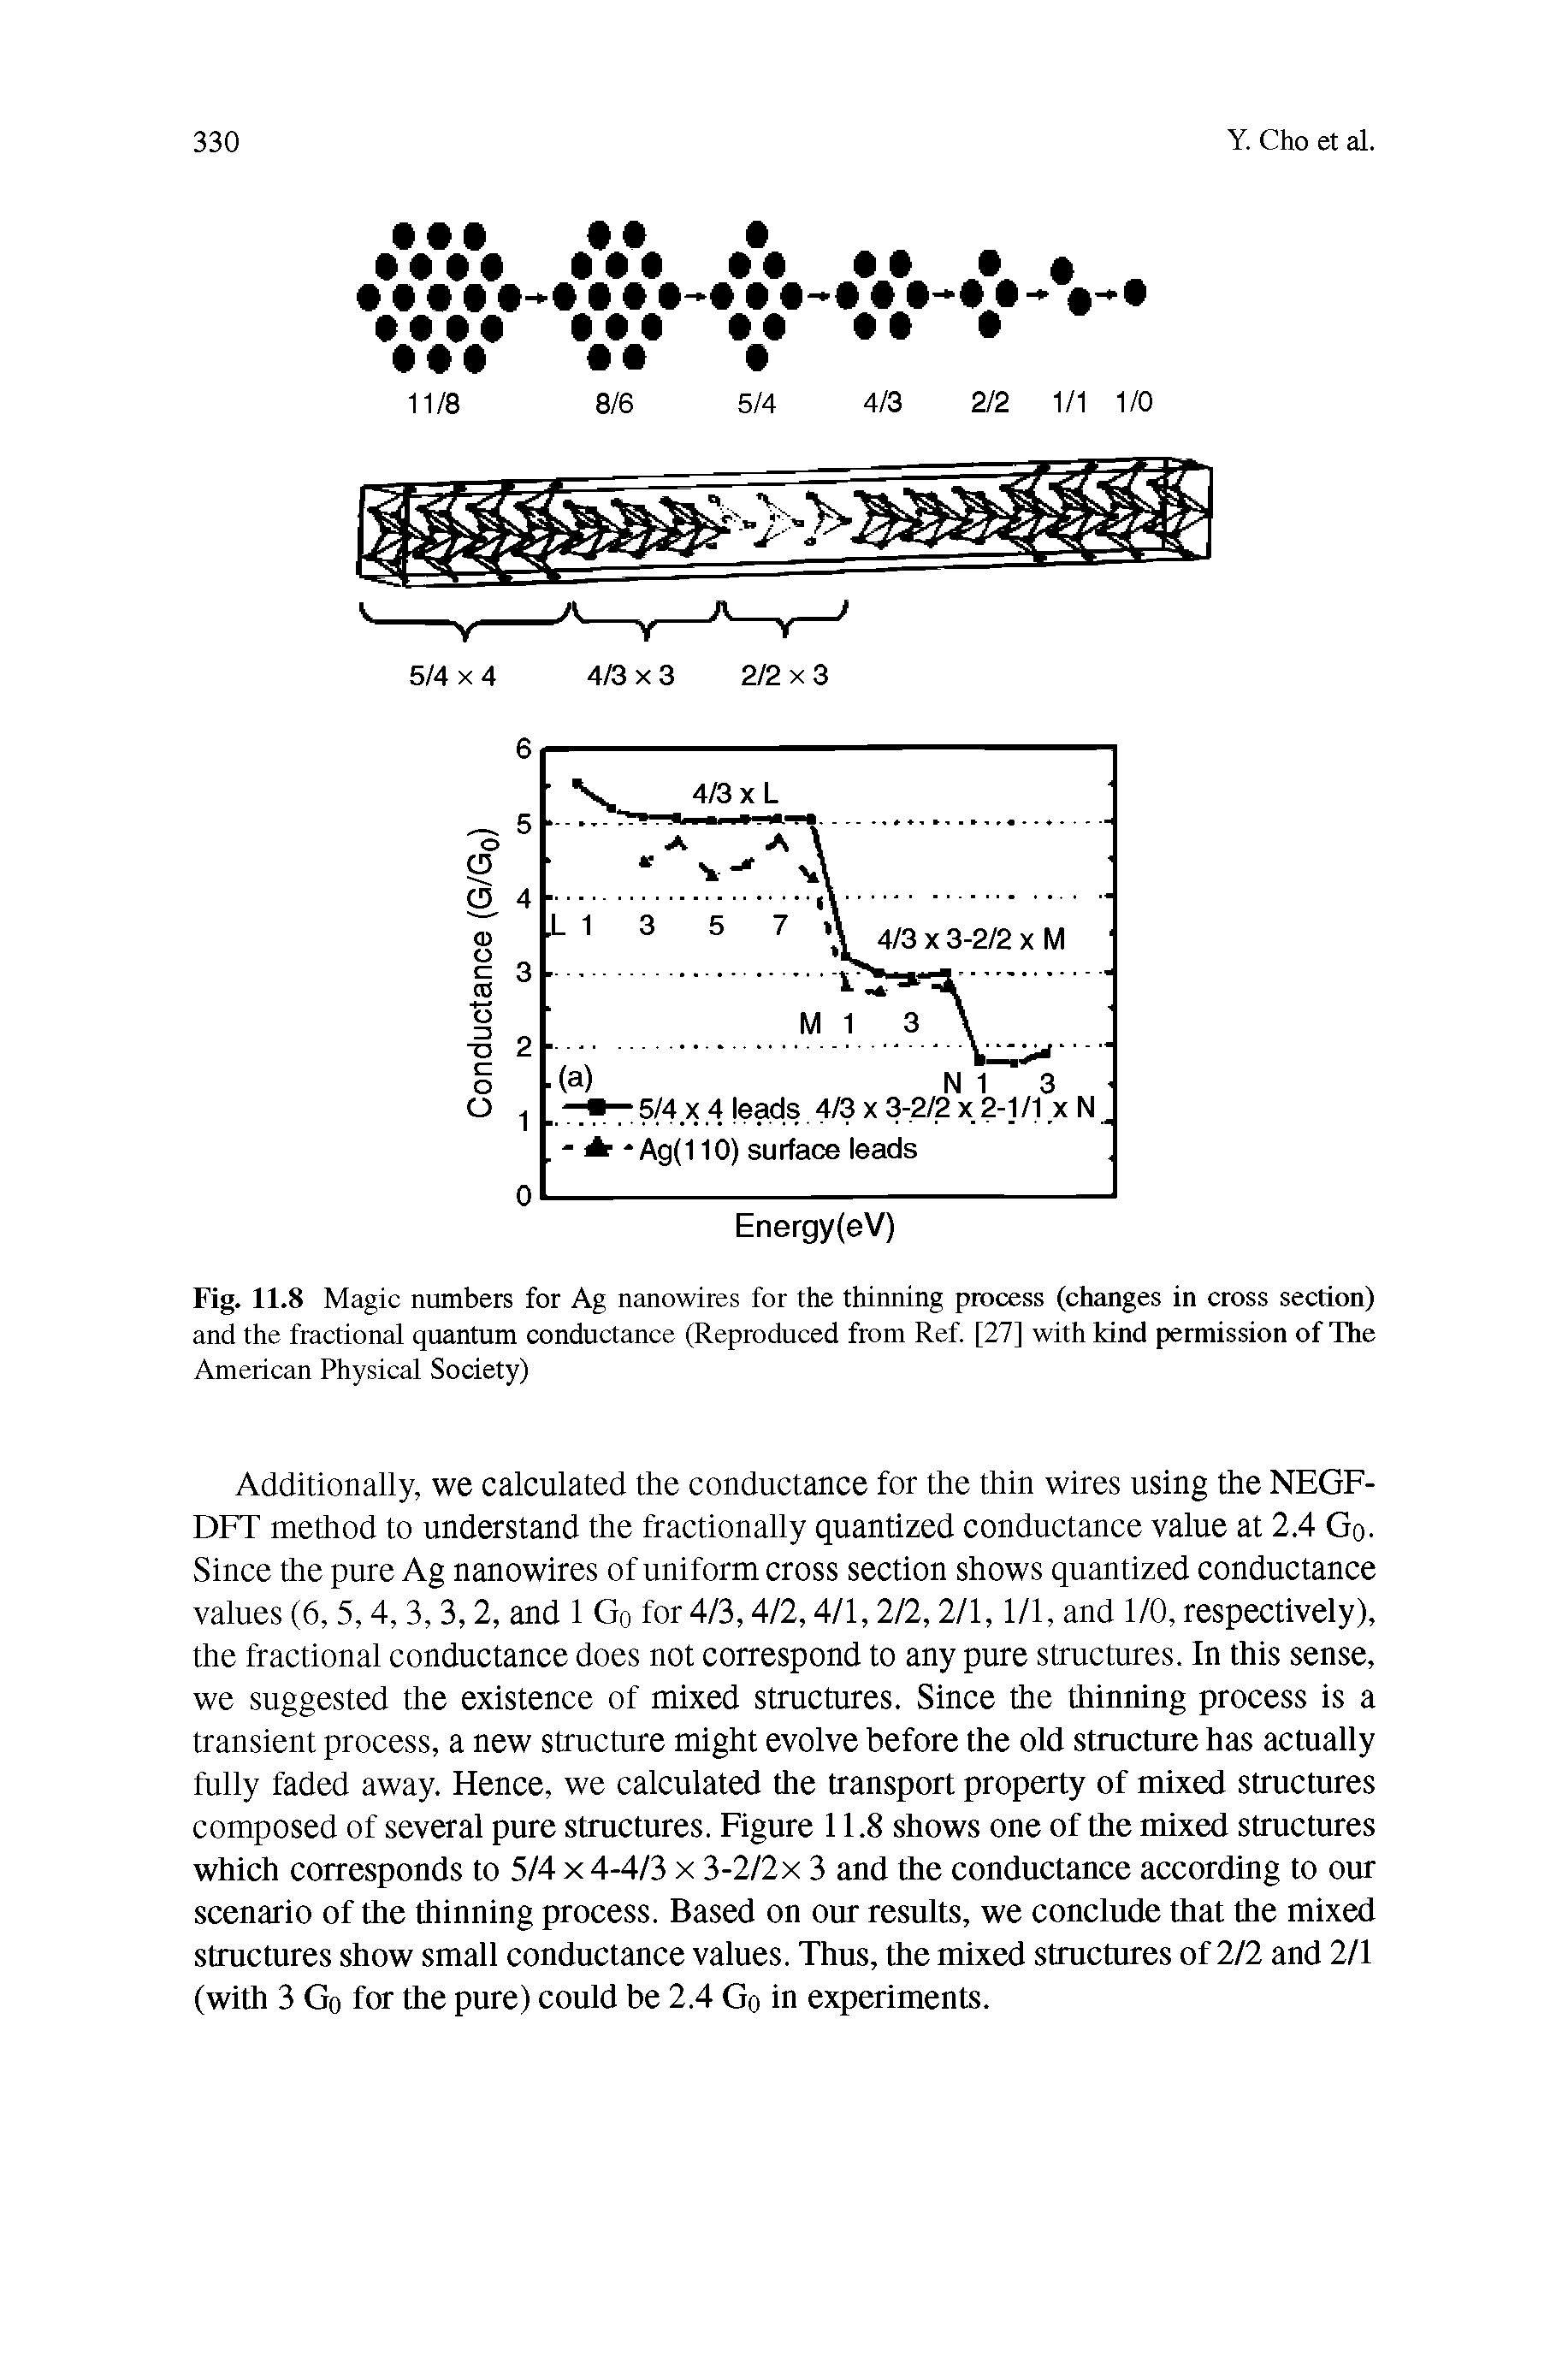 Fig. 11.8 Magic numbers for Ag nanowires for the thinning process (changes in cross section) and the fractional quantum conductance (Reproduced from Ref. [27] with kind permission of The American Physical Society)...